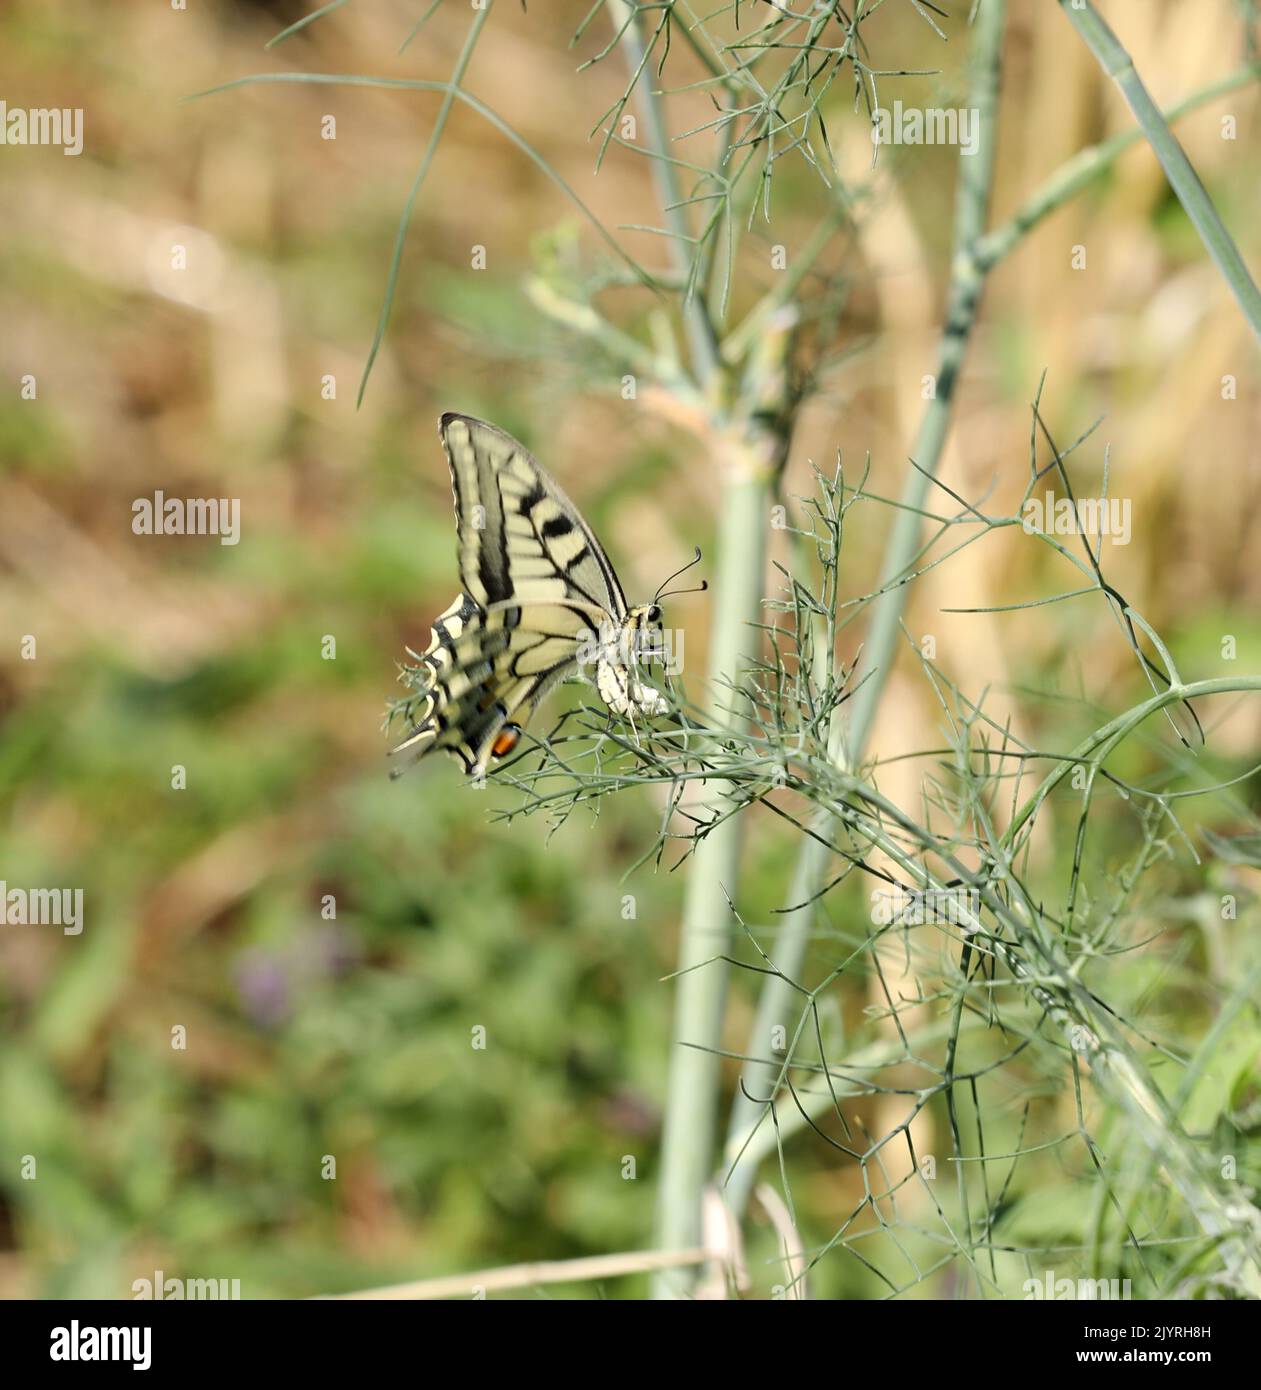 Swallowtail Dovetail butterfly on a plant Stock Photo